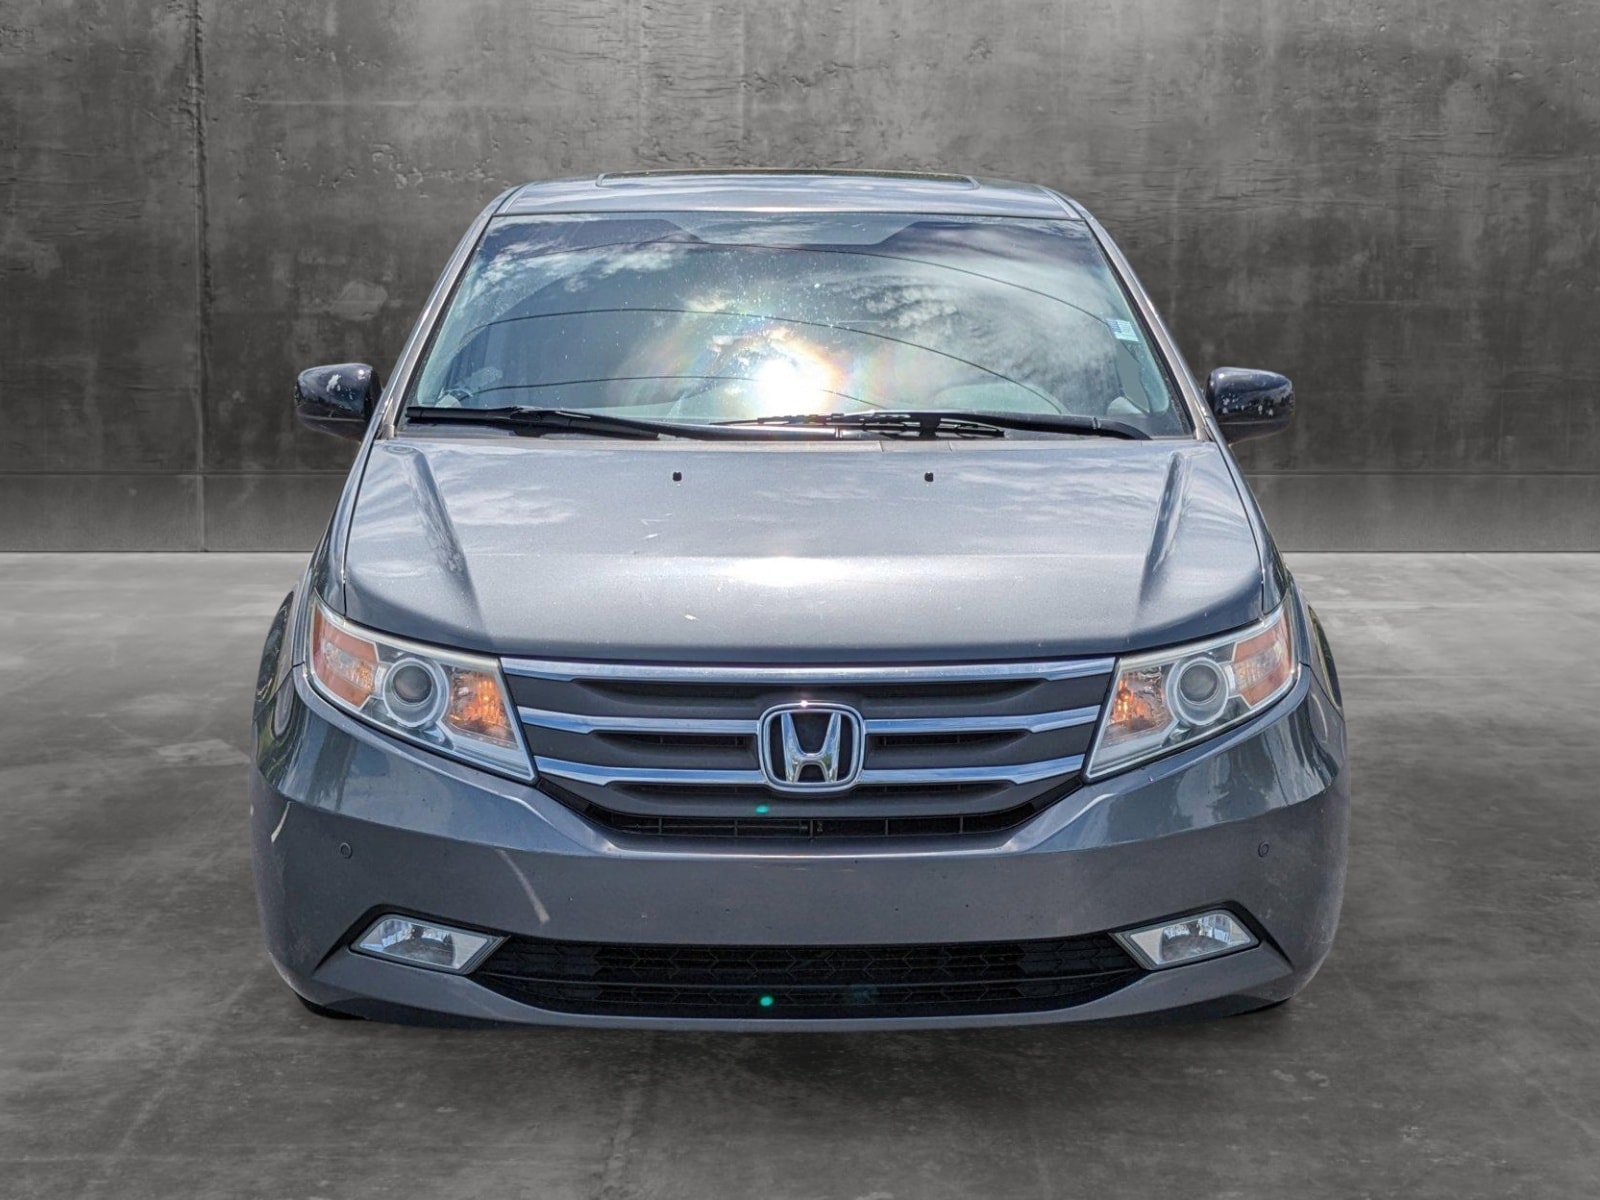 Used 2012 Honda Odyssey Touring with VIN 5FNRL5H94CB096137 for sale in Sanford, FL